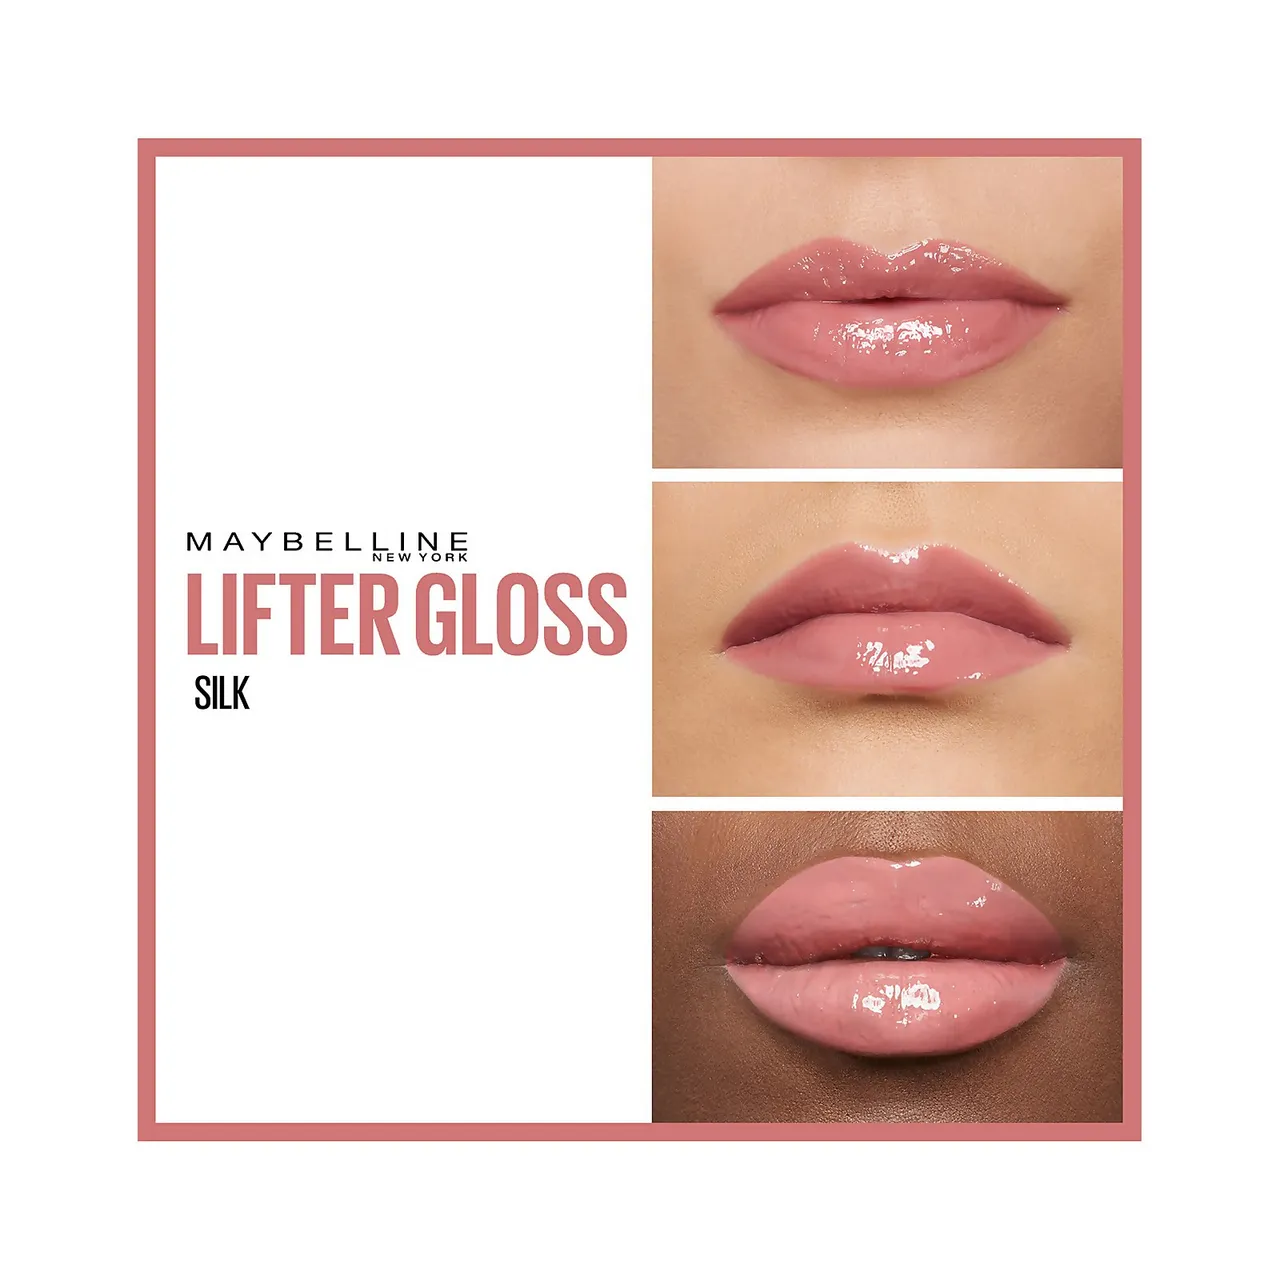 Maybelline Lifter Gloss Hydrating Lip Gloss with Hyaluronic Acid 5g (Various Shades) - 004 Silk